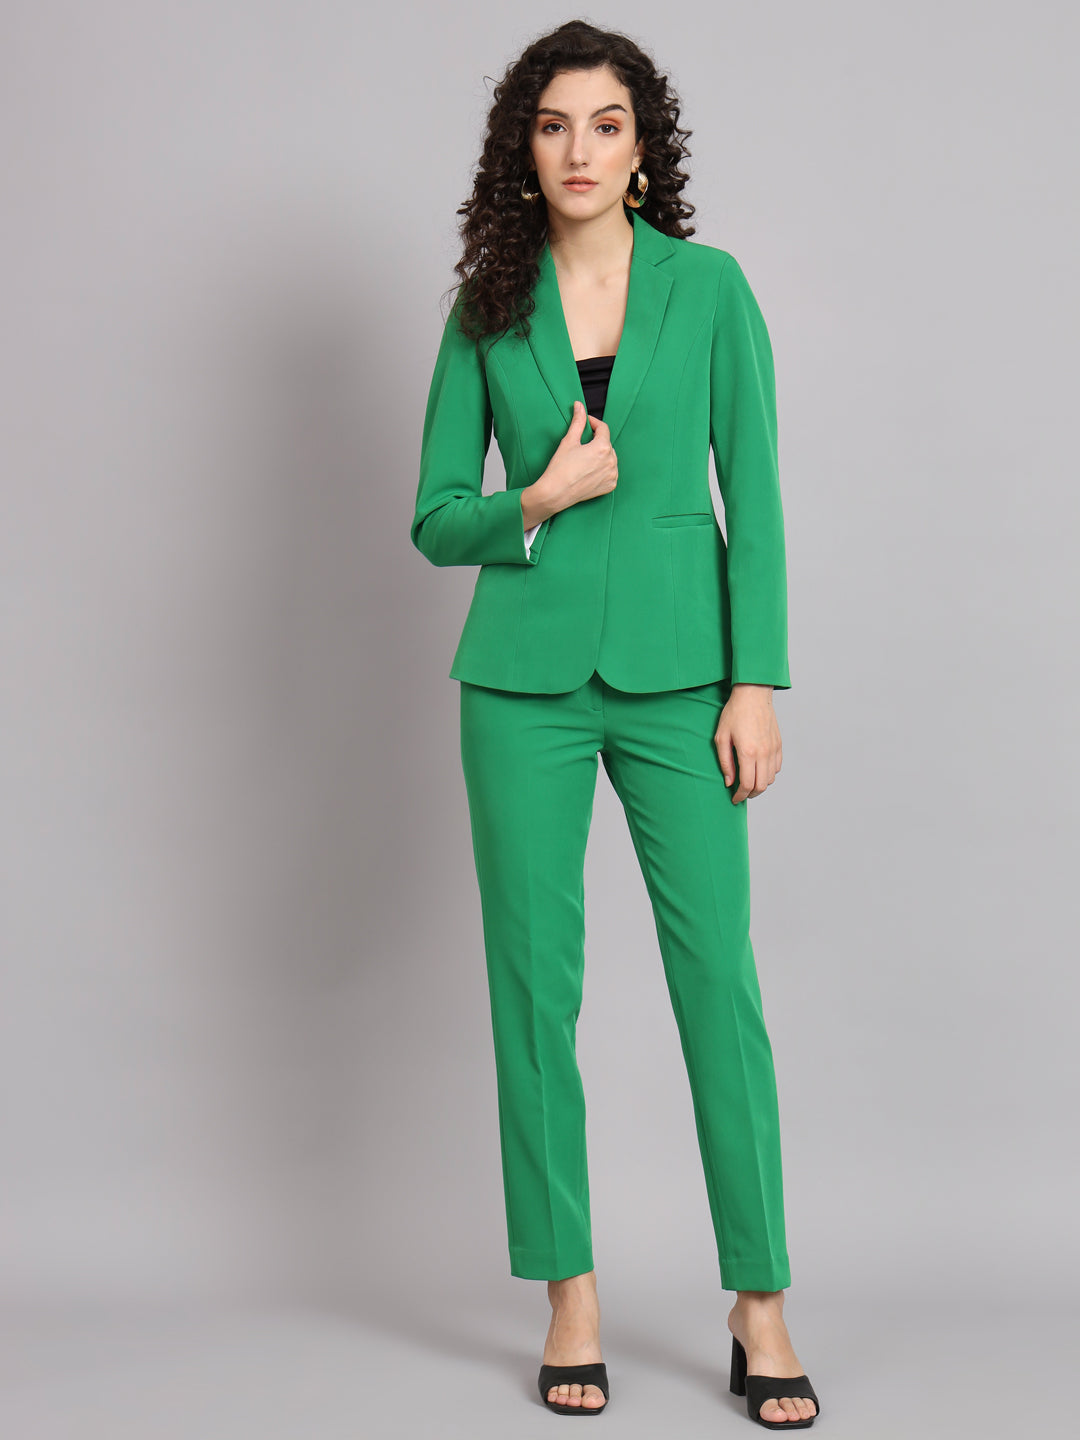 Parrot Green Polyester Notch Collar Stretch Pant Suit